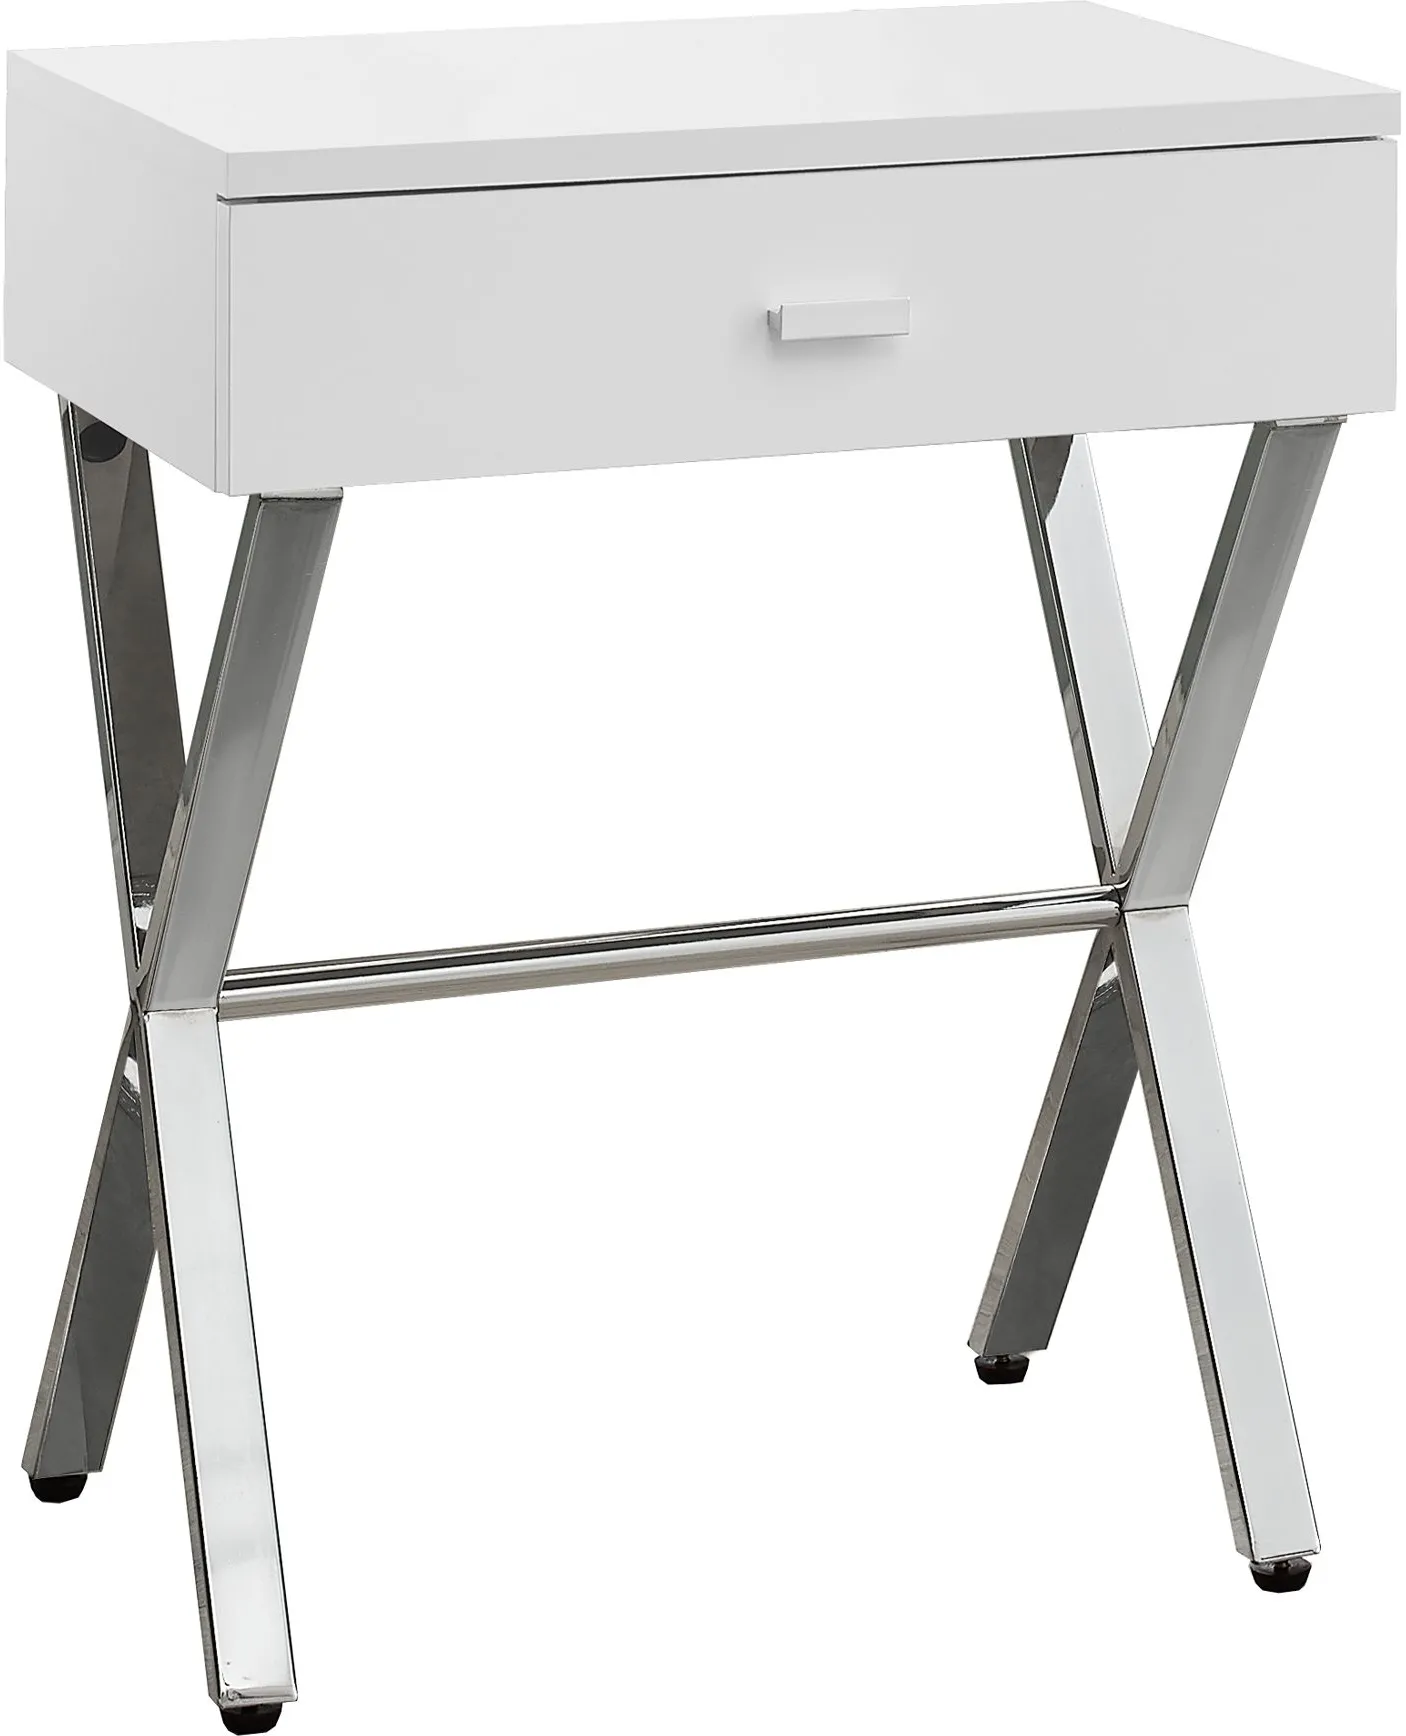 Accent Table, Side, End, Nightstand, Lamp, Storage Drawer, Living Room, Bedroom, Metal, Laminate, Glossy White, Chrome, Contemporary, Modern